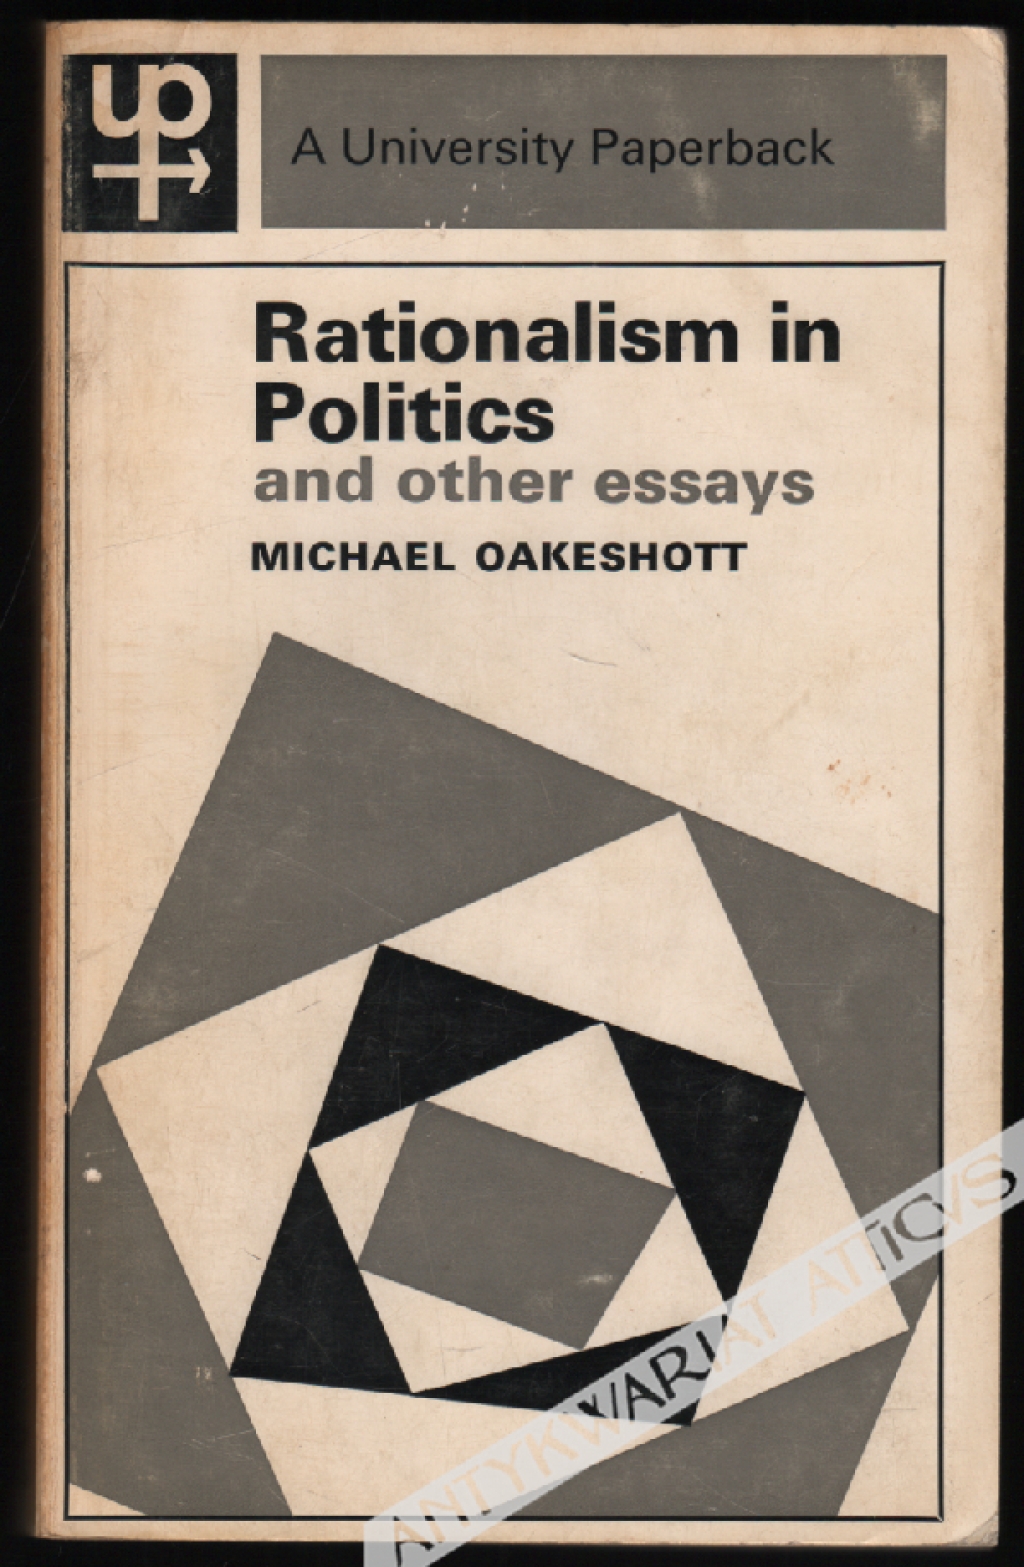 Rationalism in Politics and other essays